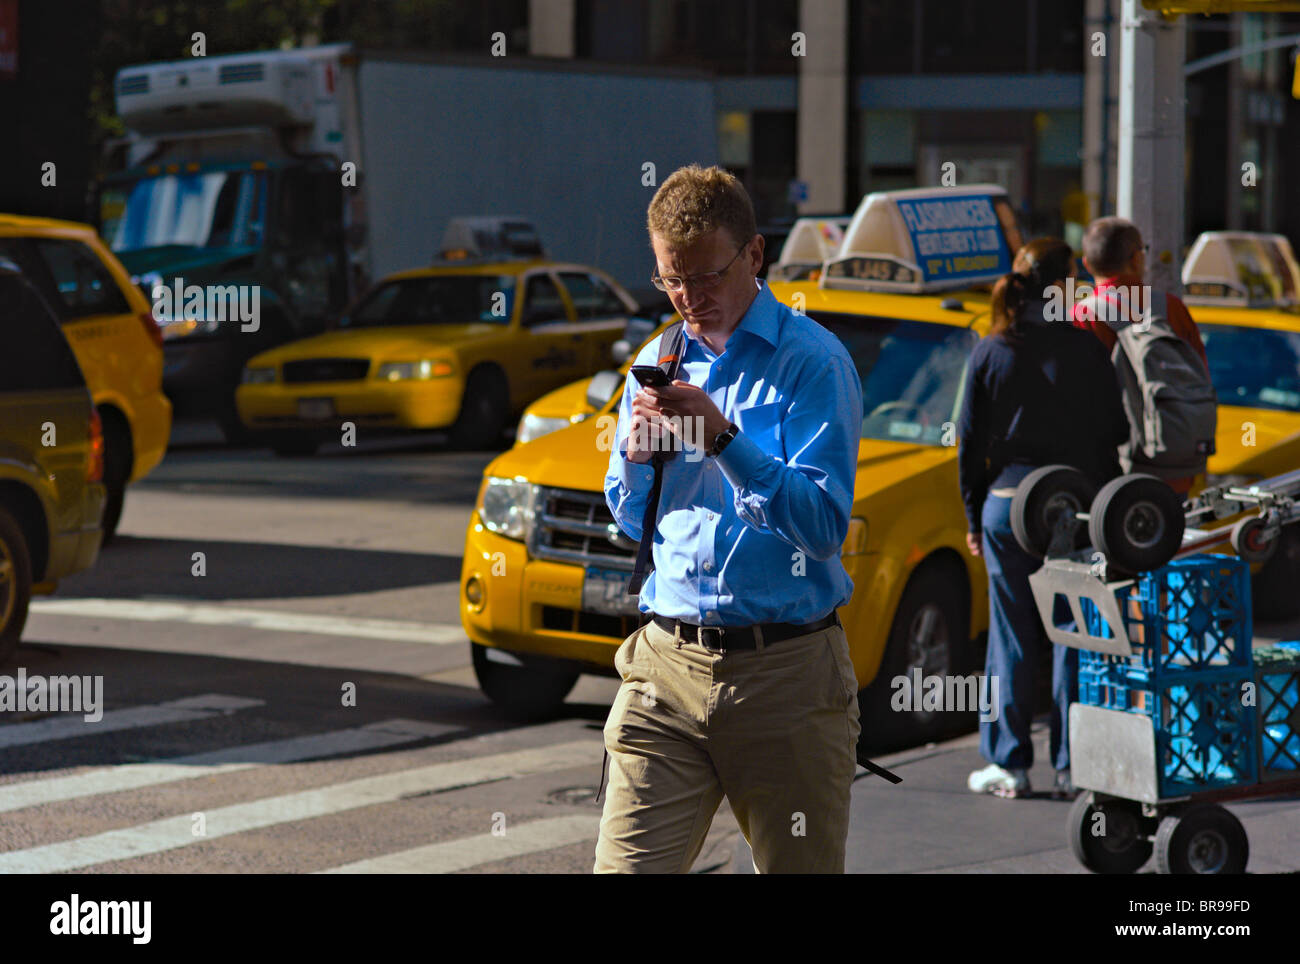 Man in blue shirt crossing busy street while operating hand-held device. Stock Photo